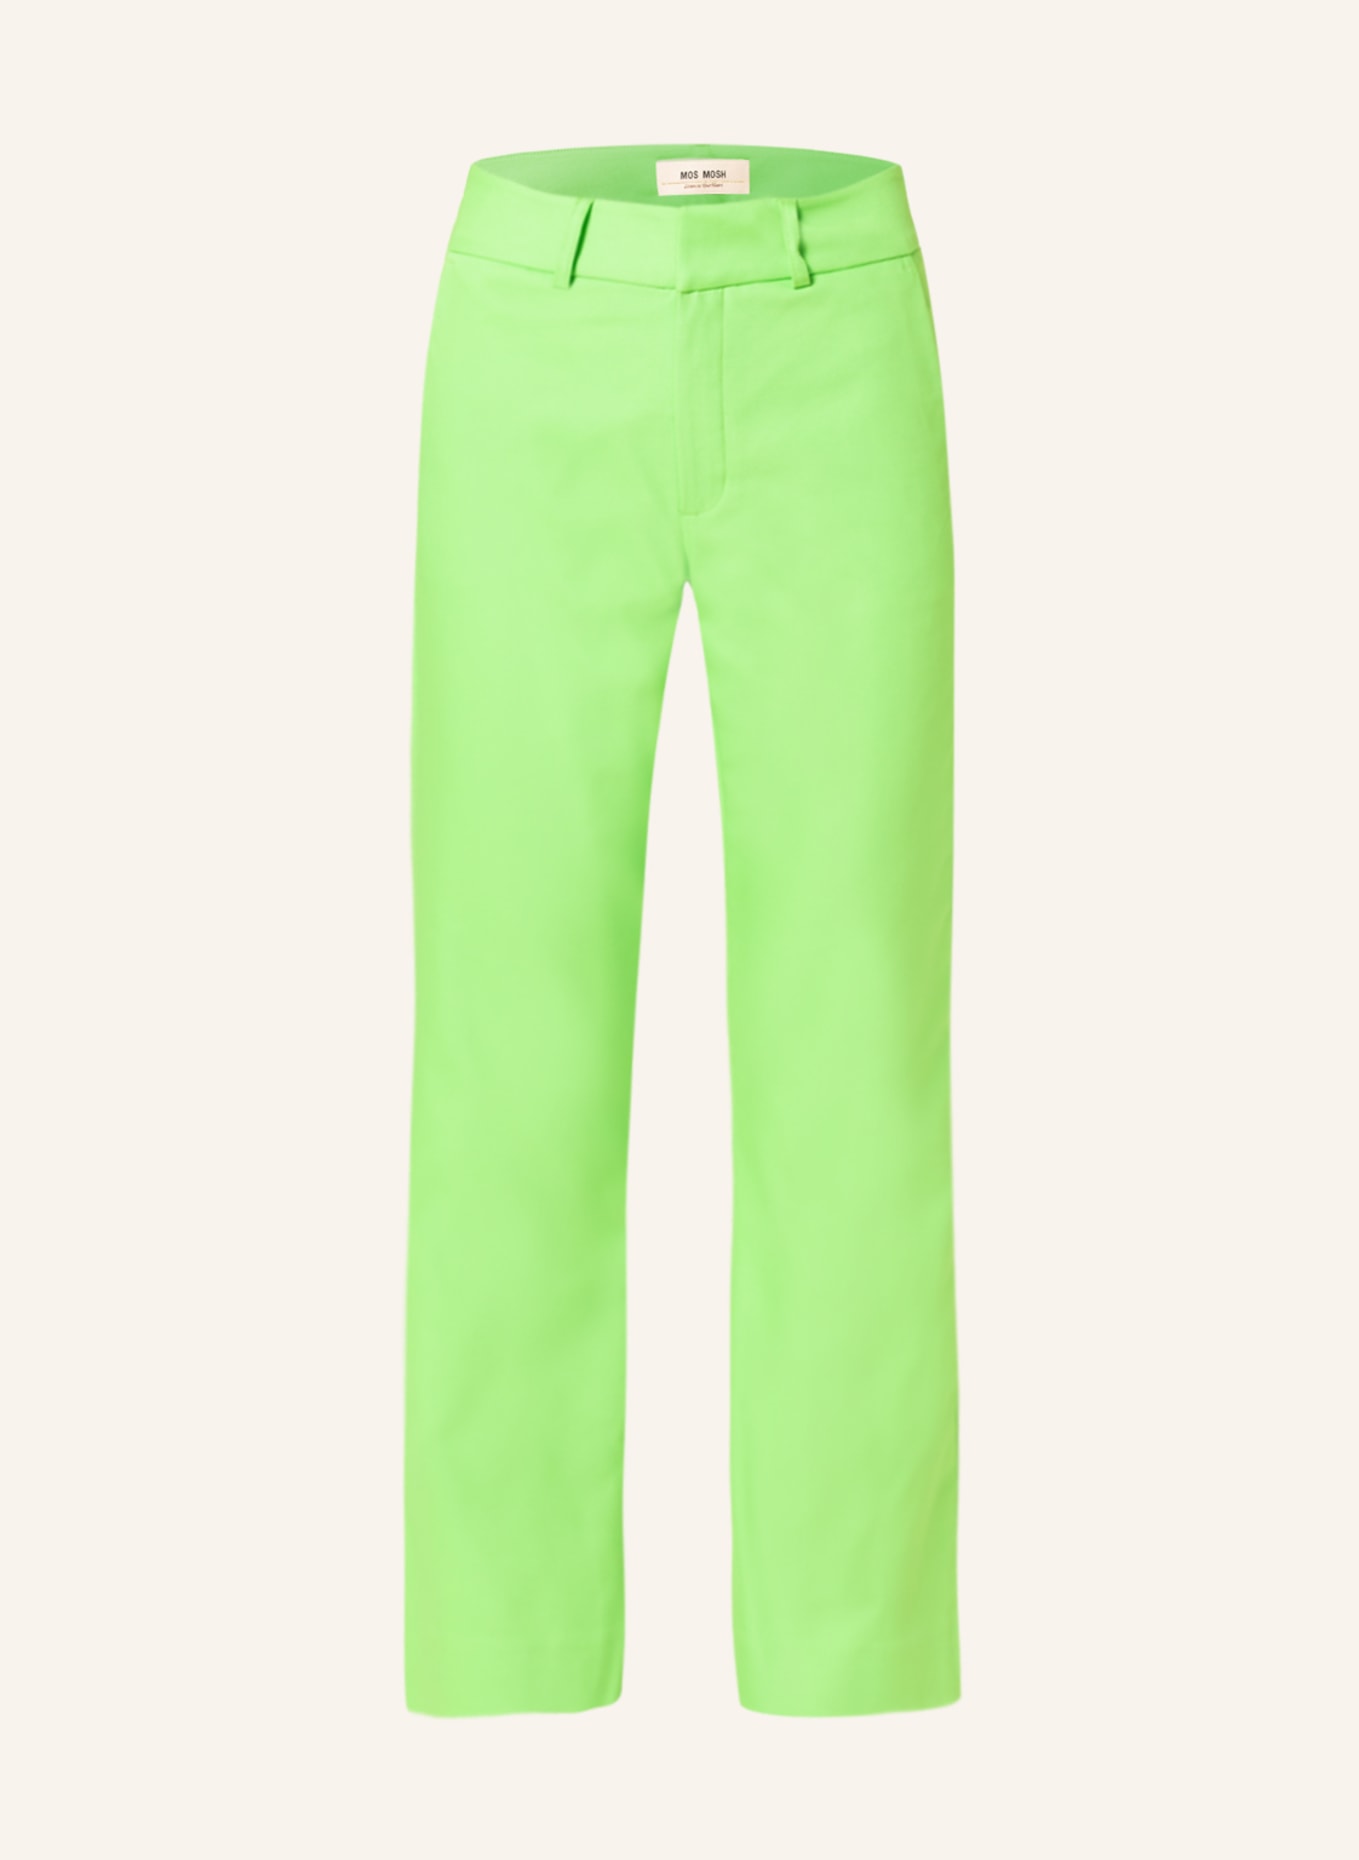 Cotton Solid neon Green Lounge Trouser